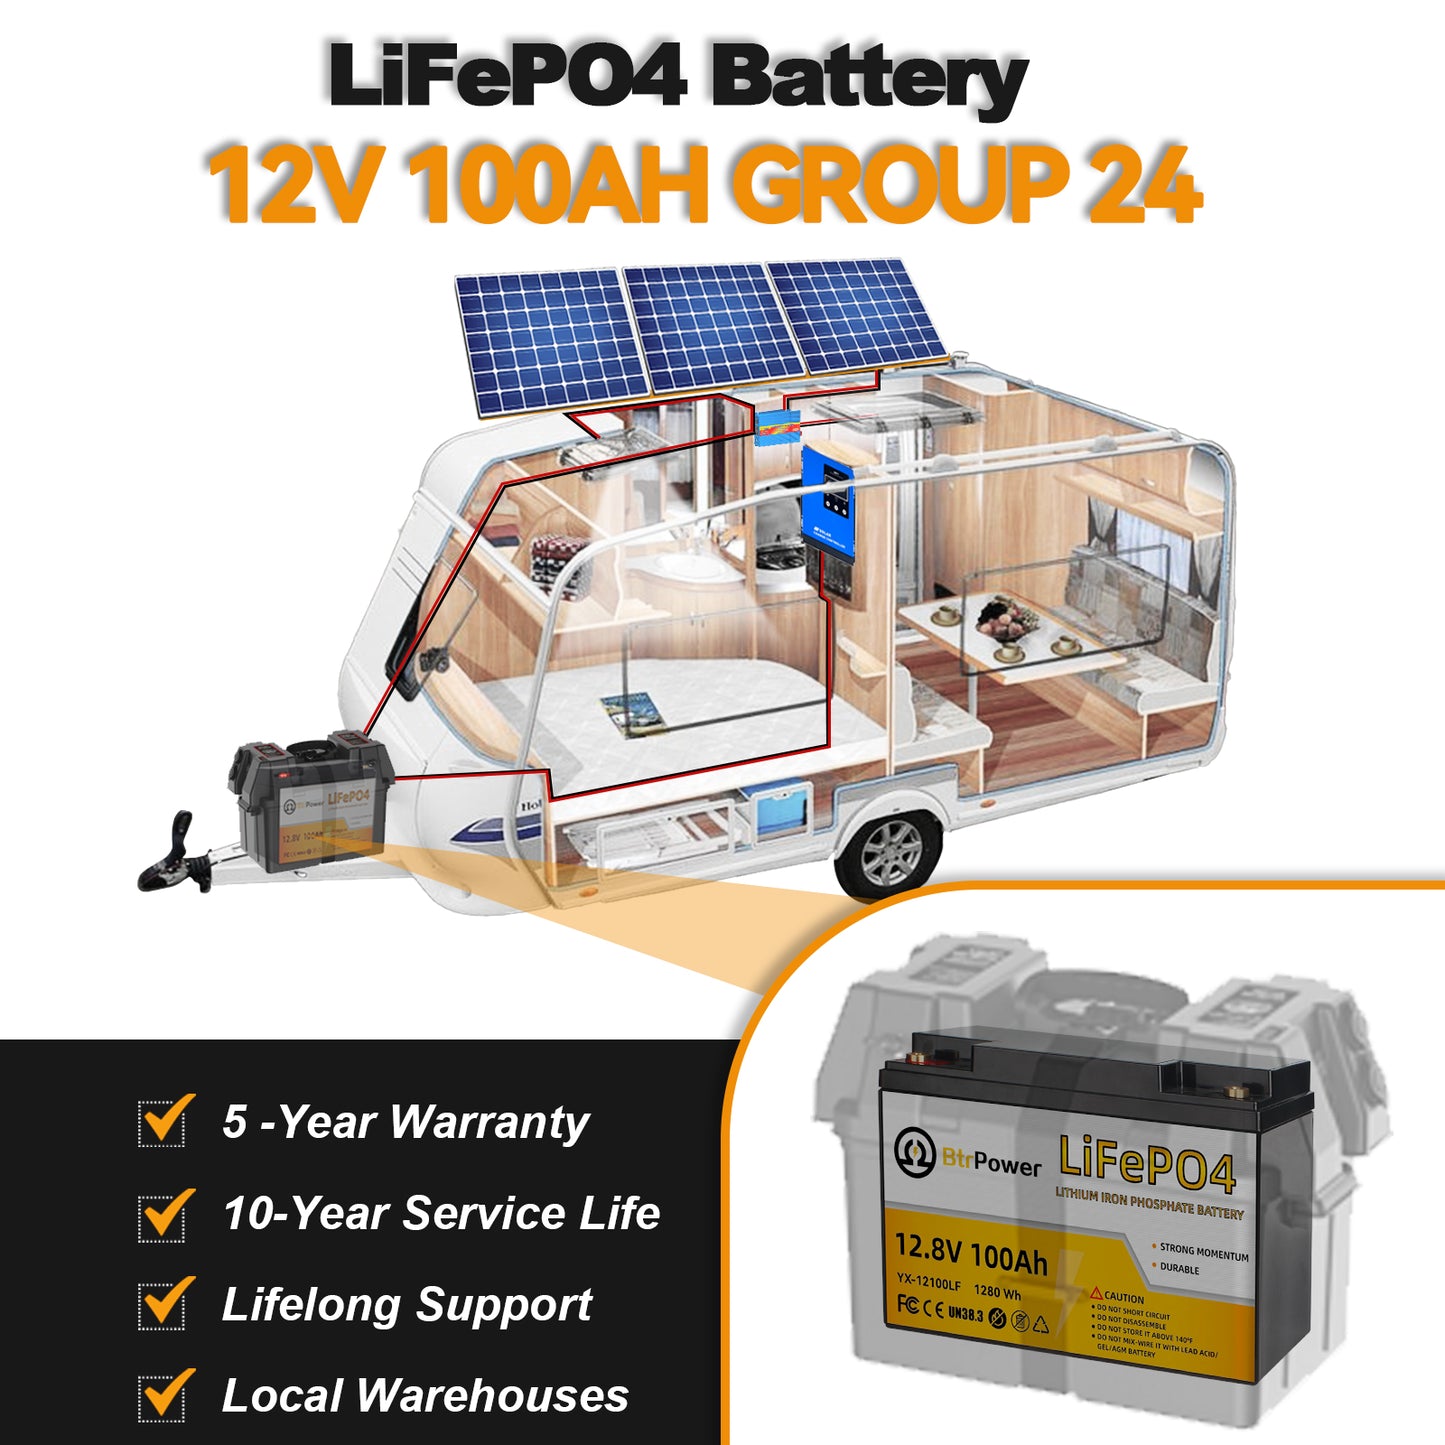 12V 100Ah Group 24 LiFePO4 Lithium Battery Built-In 100A BMS, 1280Wh Energy